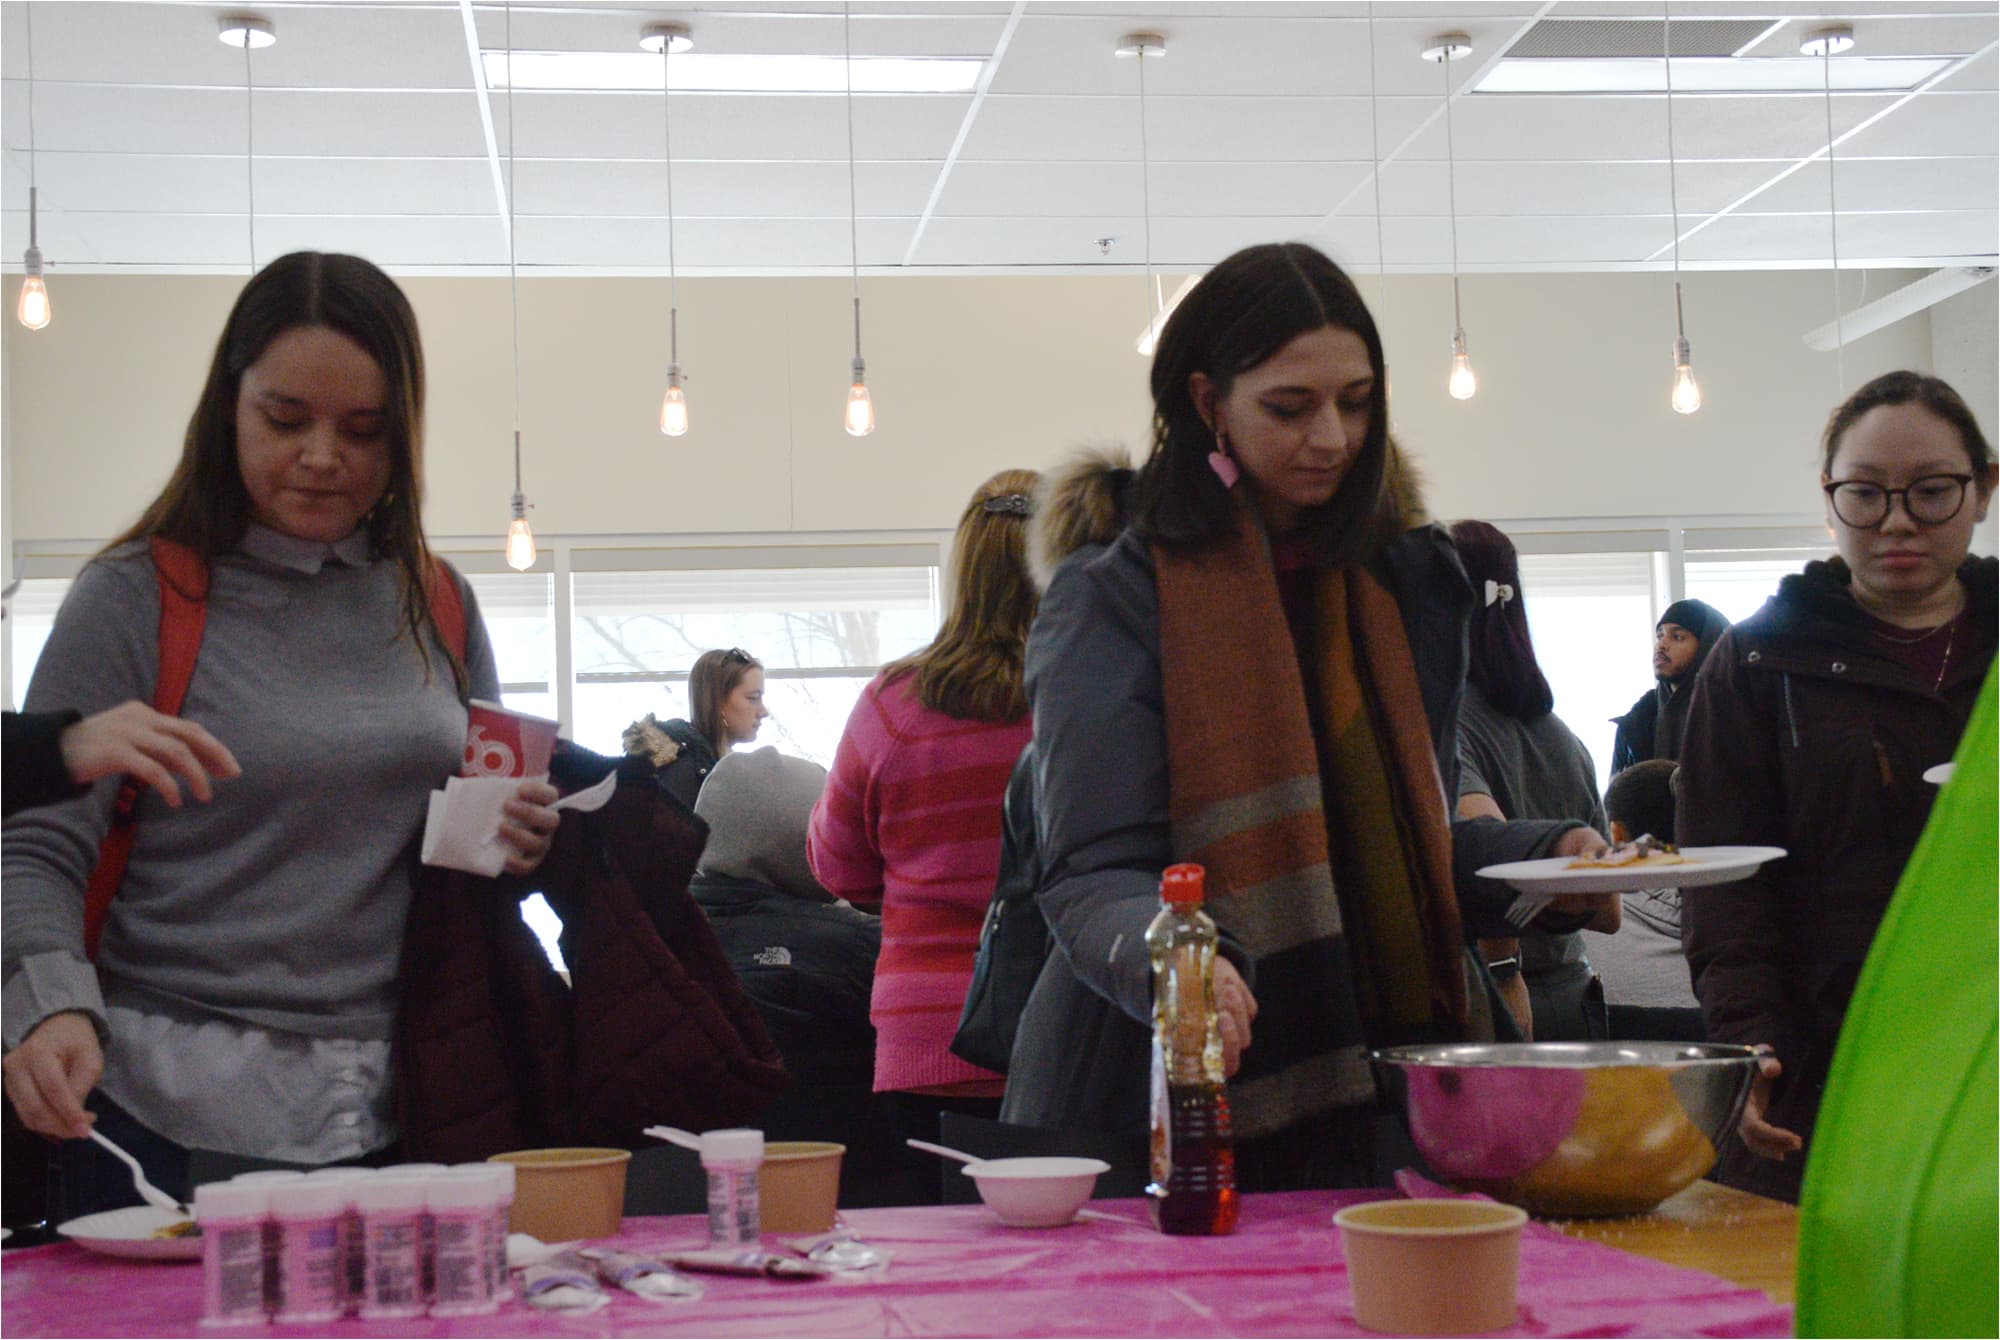 Students enjoying their free pancakes at the event on Feb. 14.